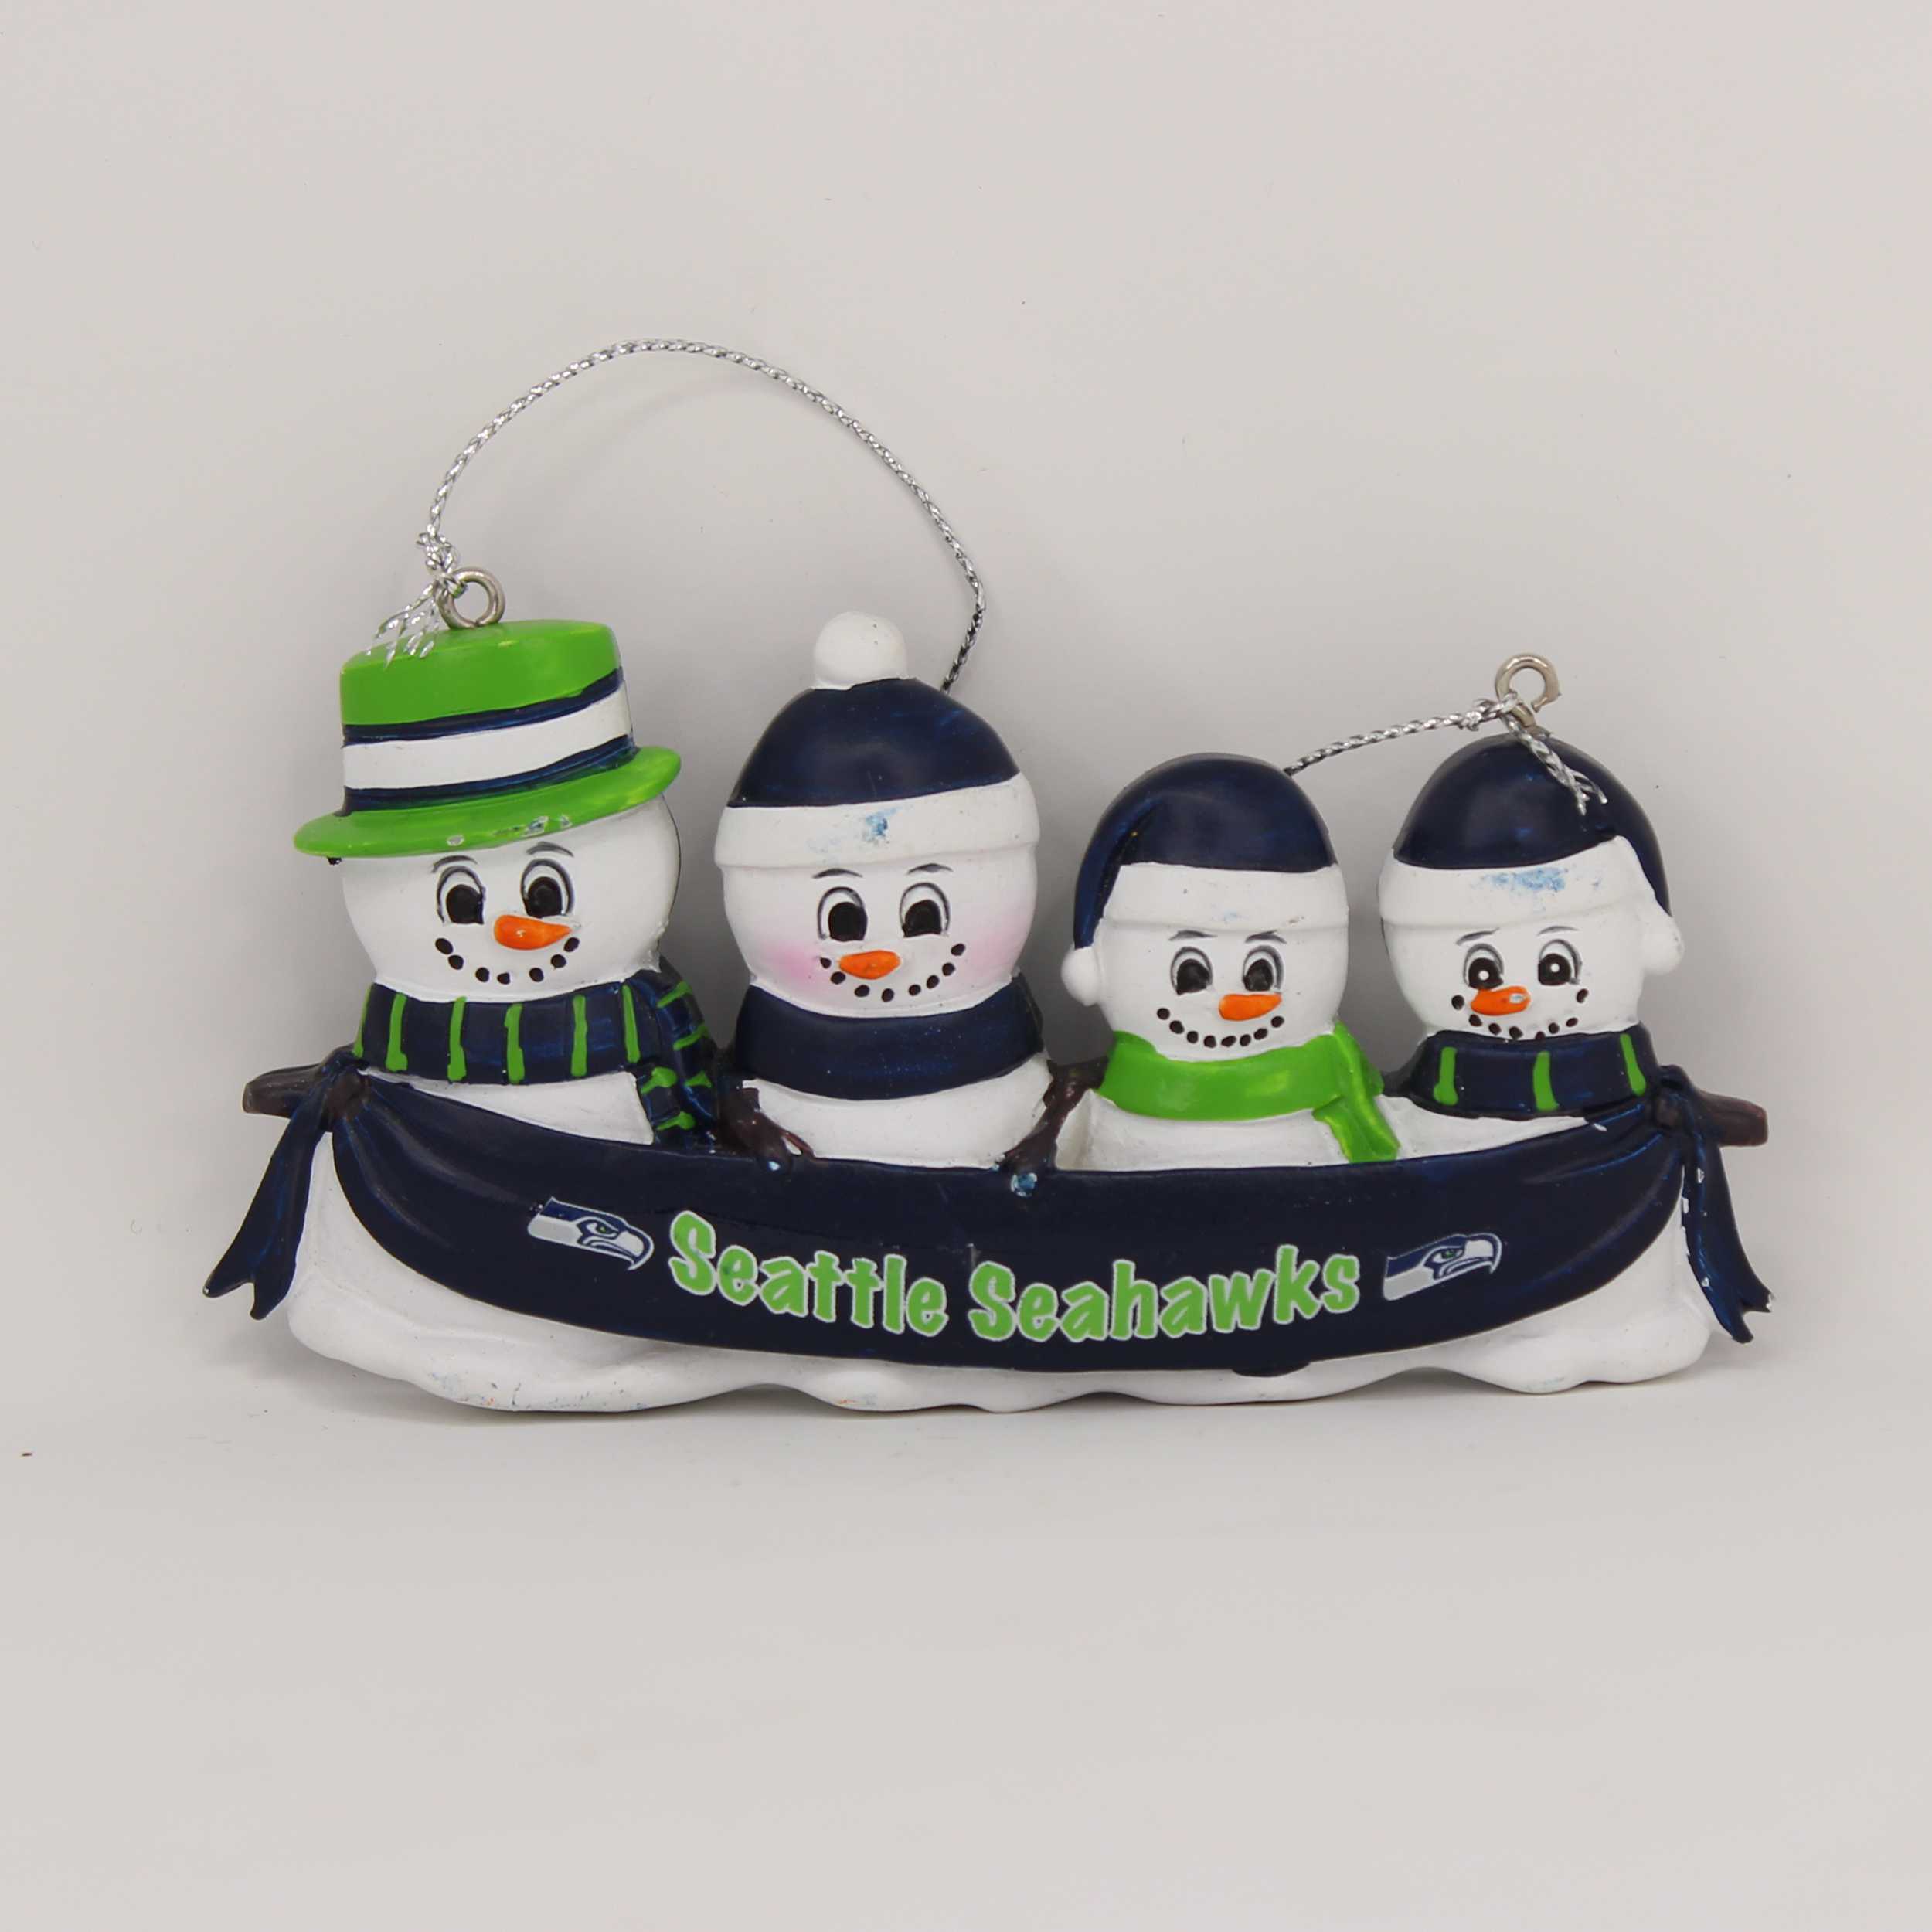 Personalized Family Ornament Seattle Seahawks